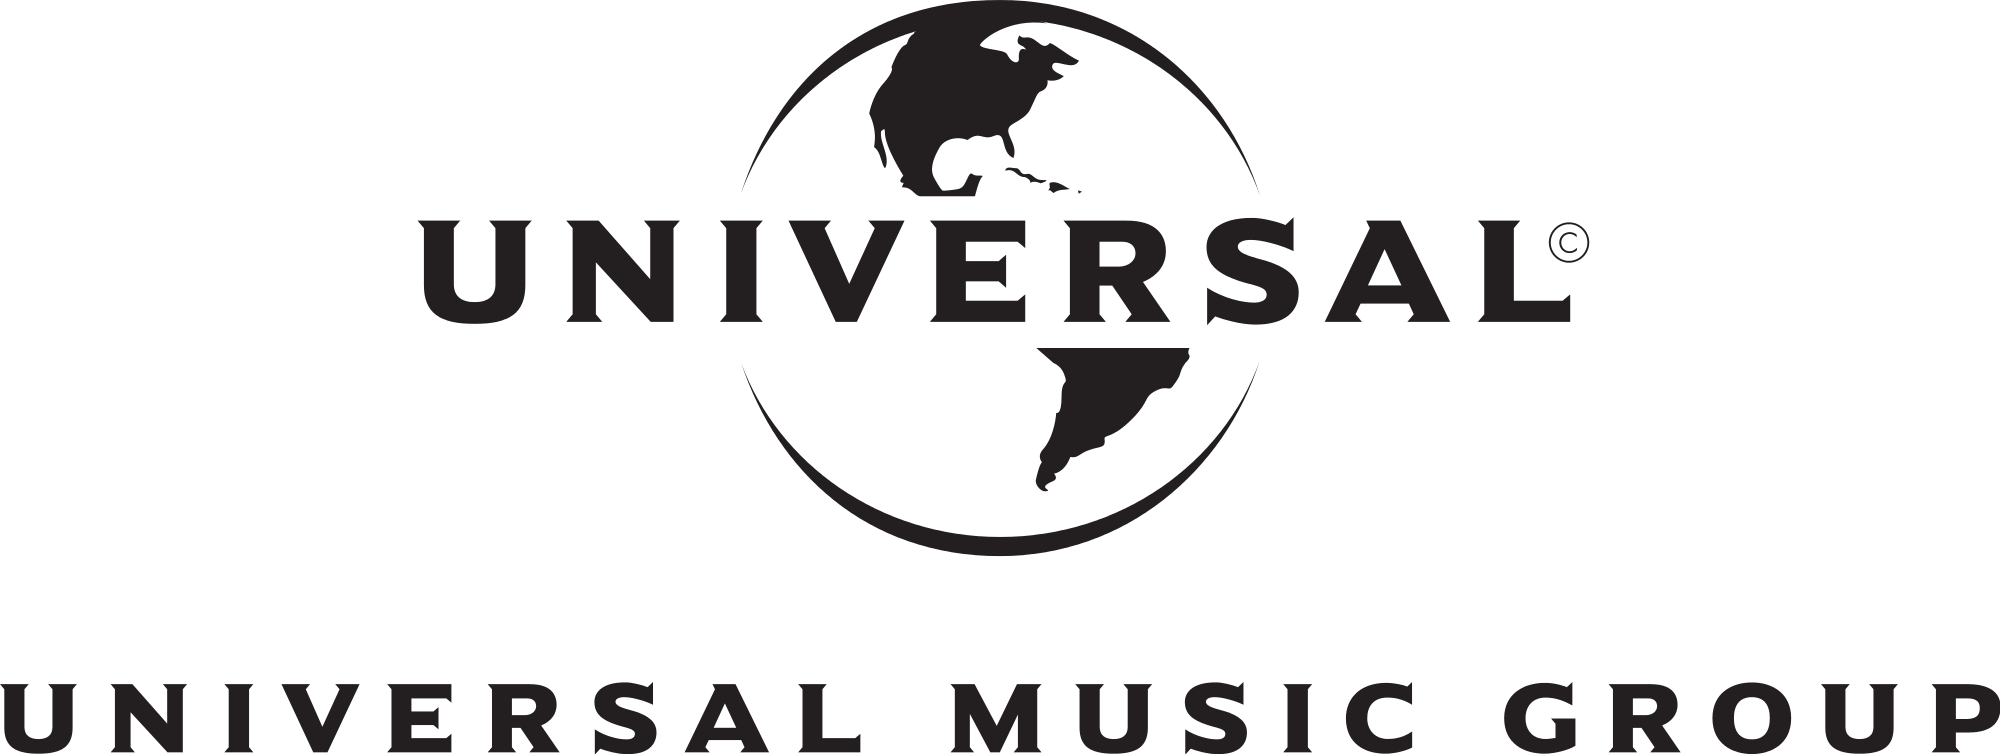 UMG Logo - Universal Music Group, the world's leading music company. Home Page